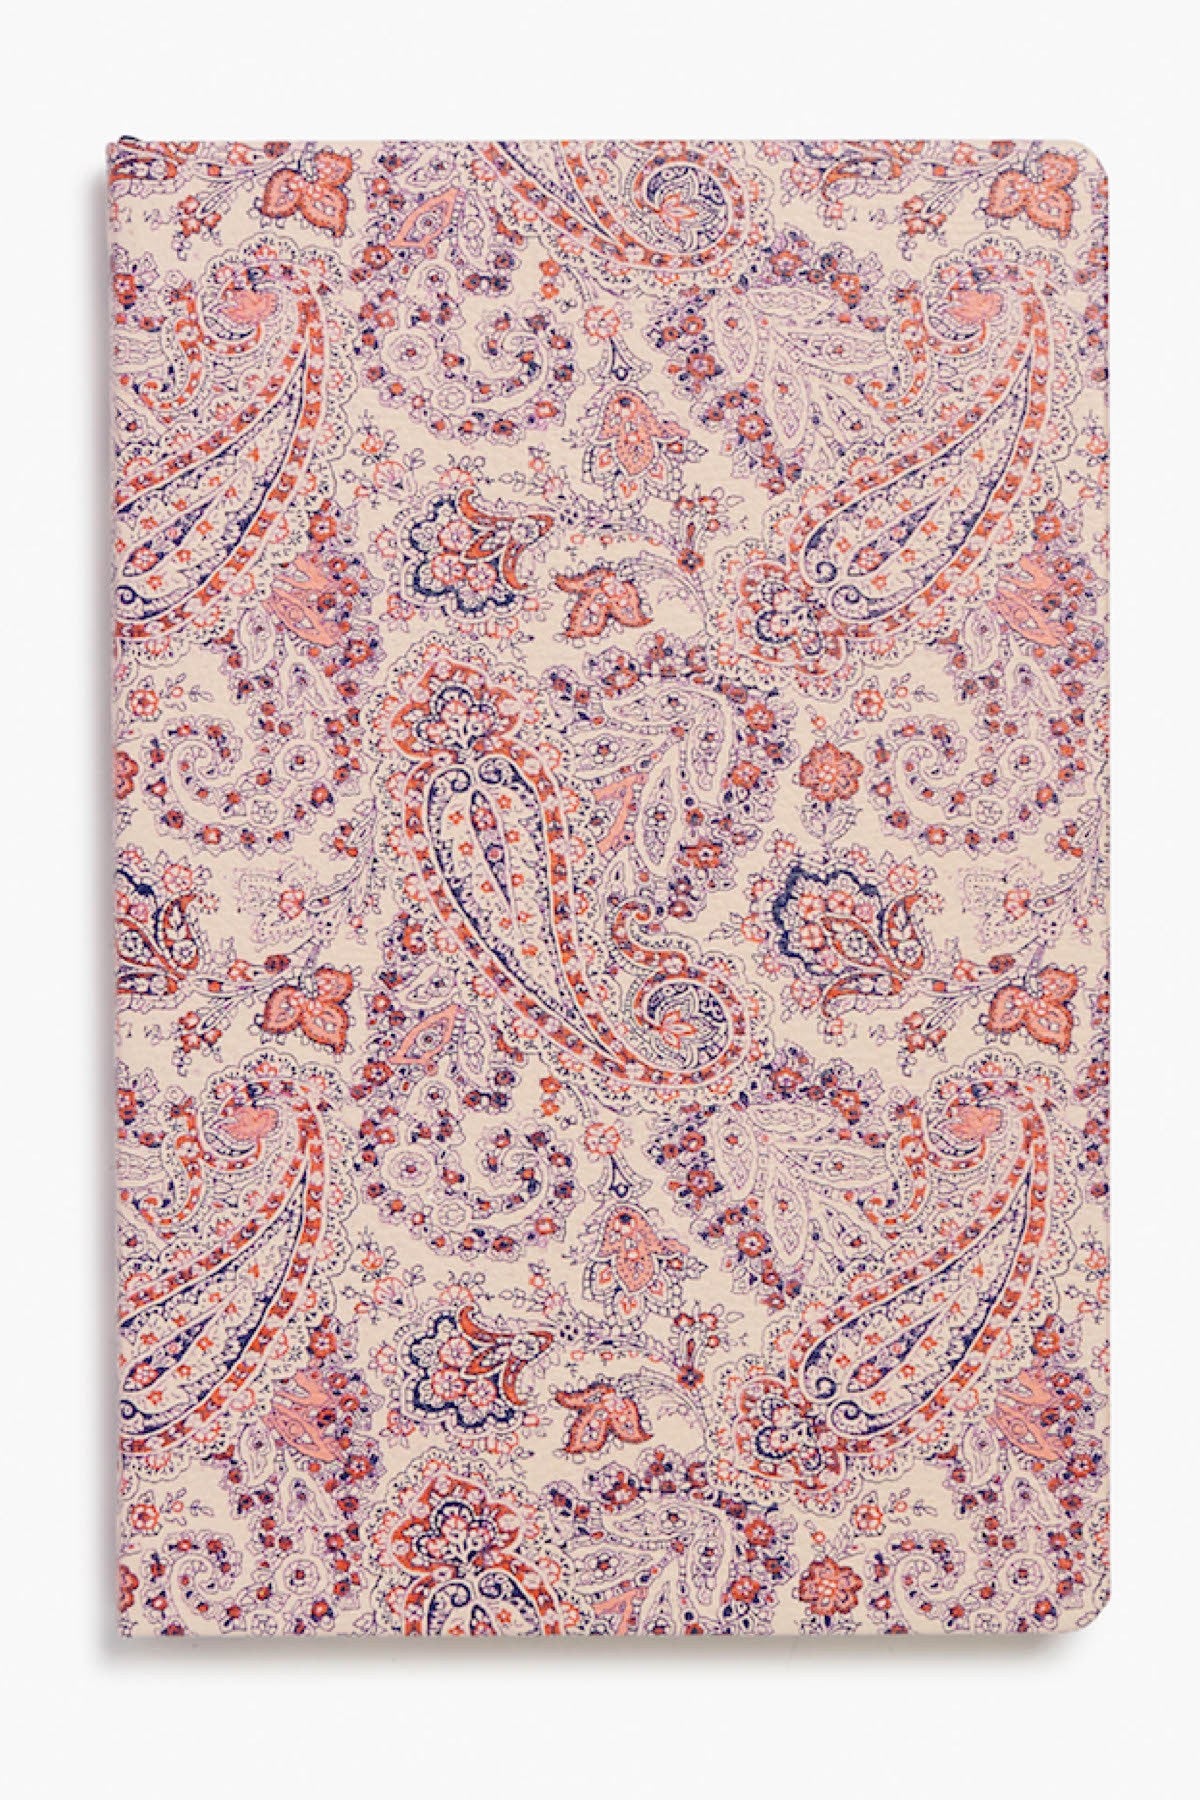 Lucky Brand Pink-Paisley Lined Hard-Cover Notebook